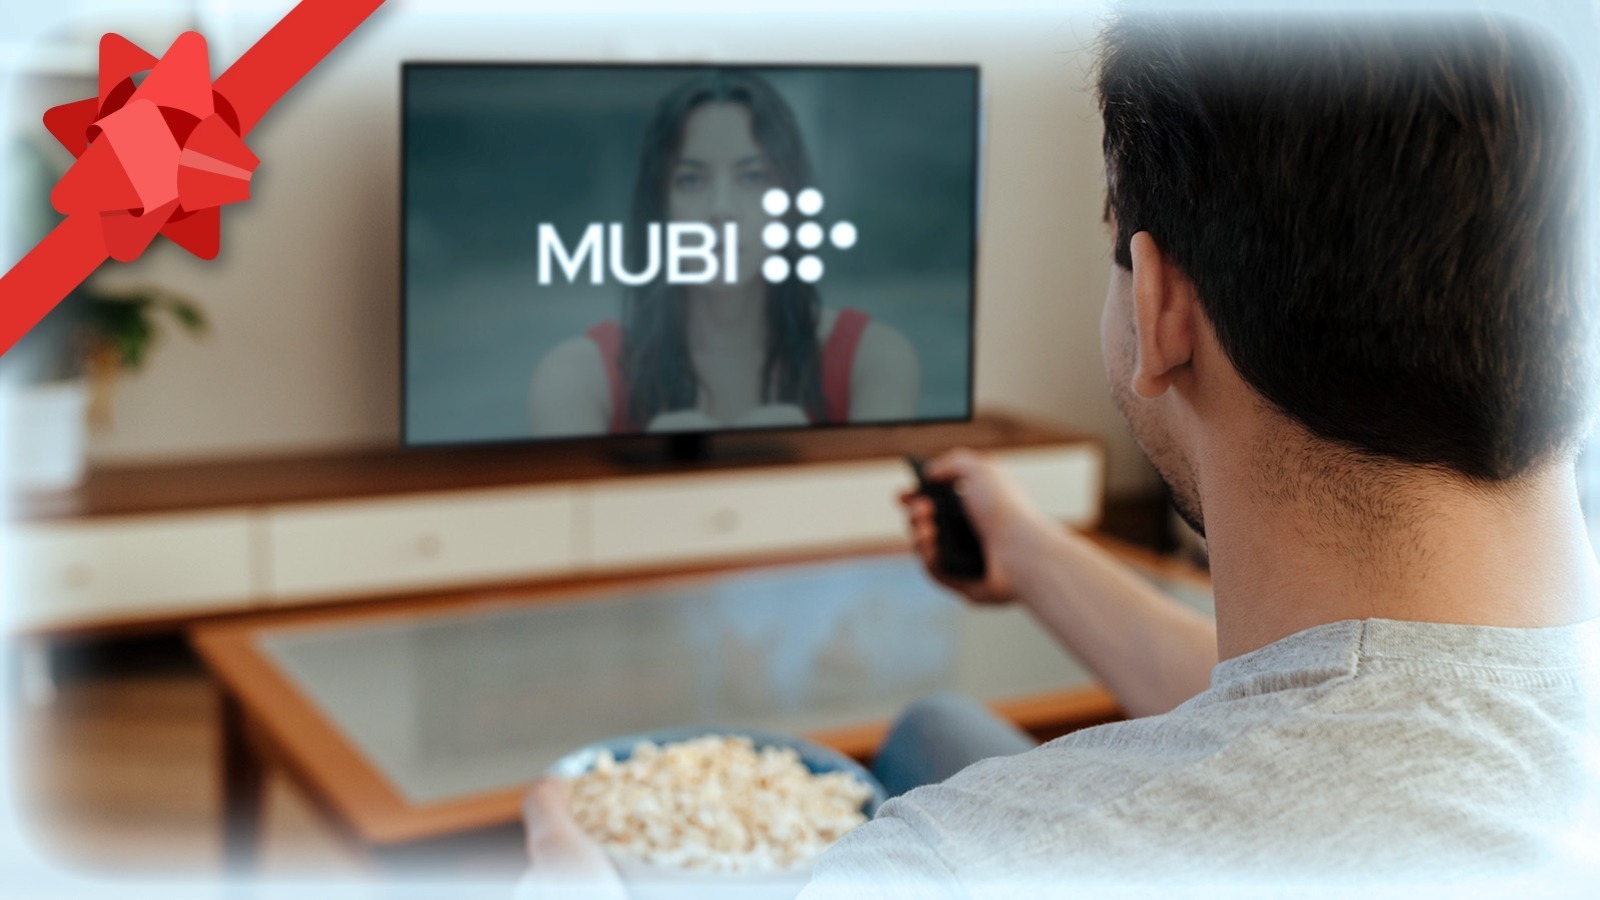 Explore Endless Movies: Win A One-Year Pass To MUBI From Your Friends
At /Film